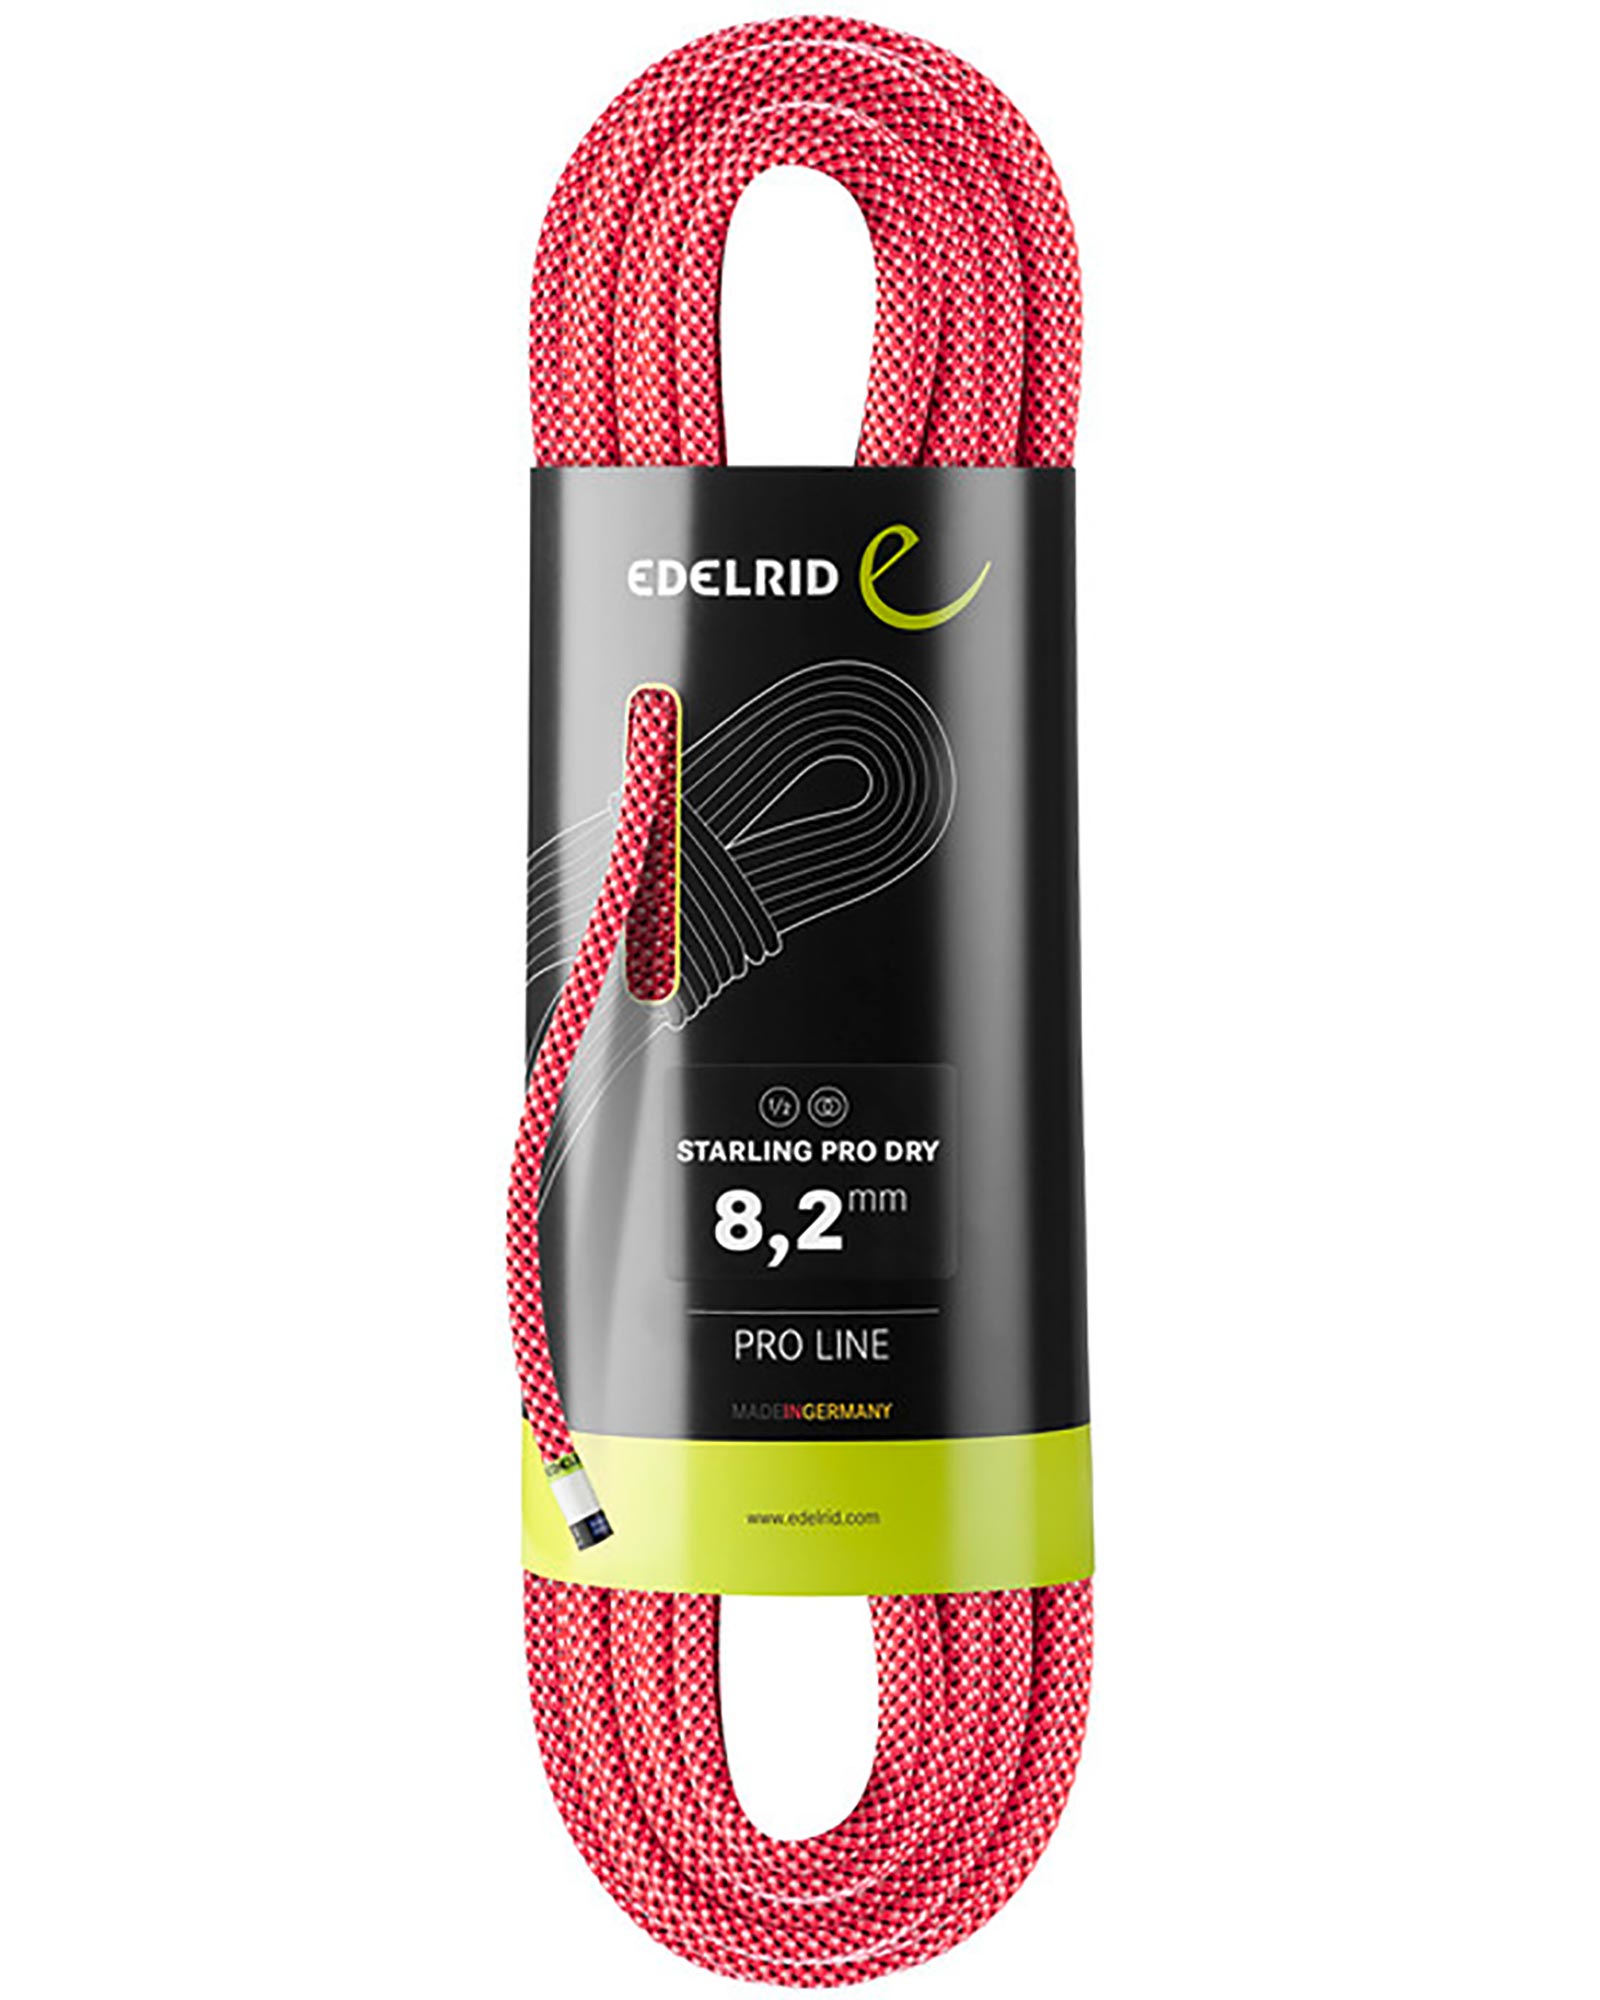 Edelrid Starling Pro Dry 8.2mm x 60m Rope - Pink 60m